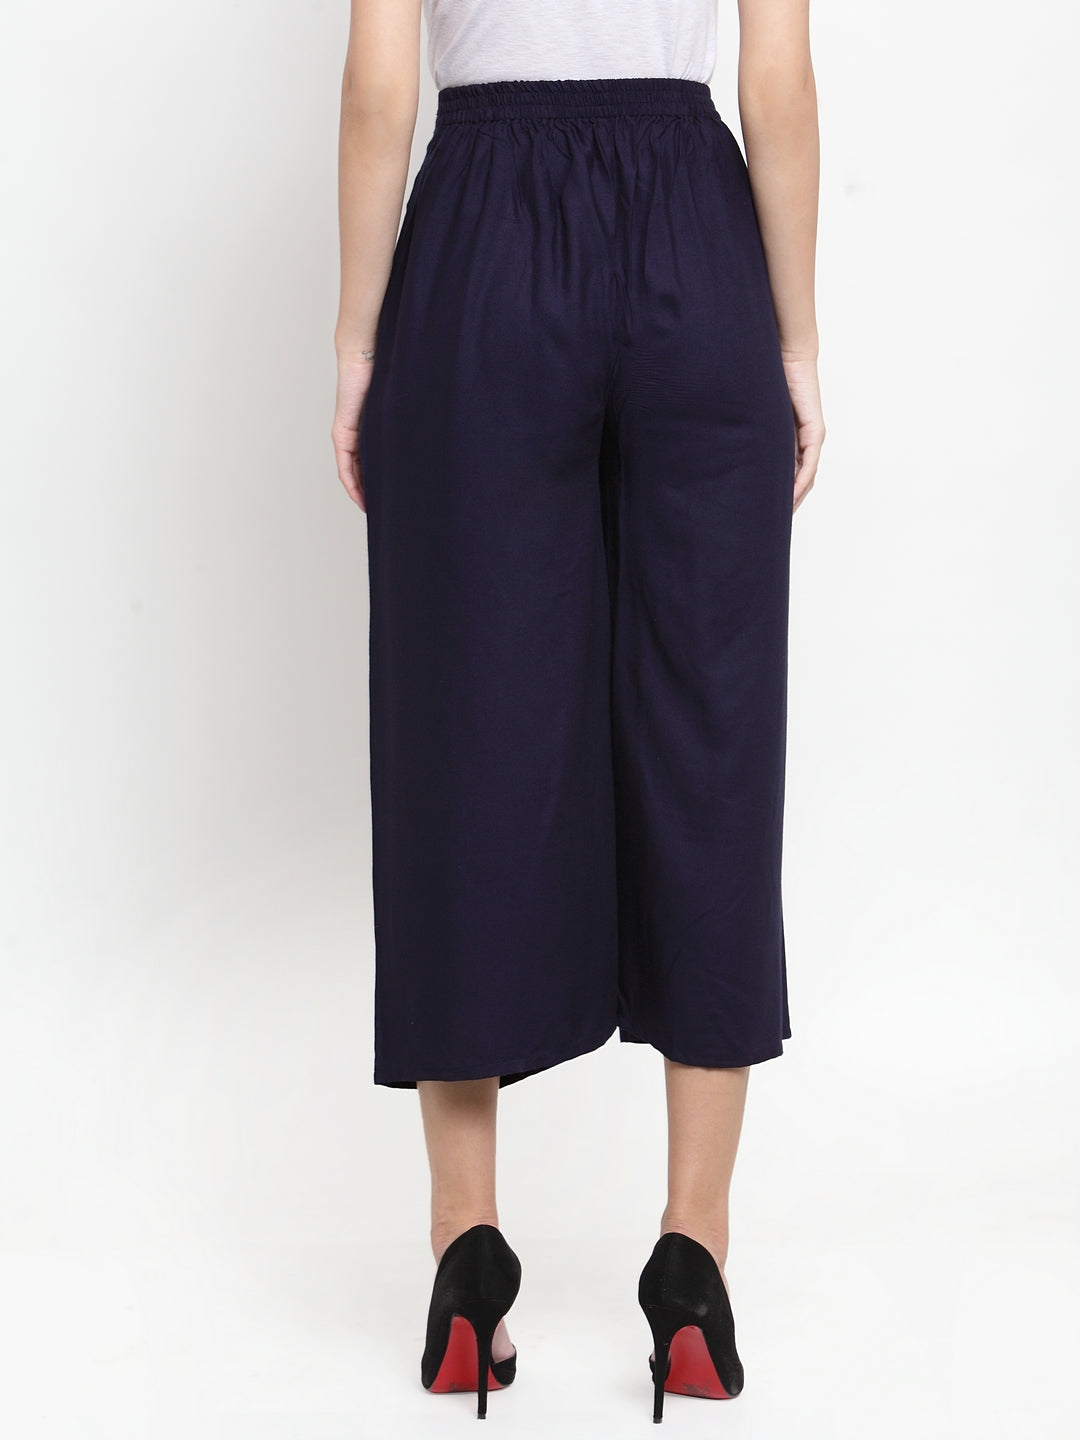 Women's Navy Blue Solid Rayon Culottes - Wahe-NOOR